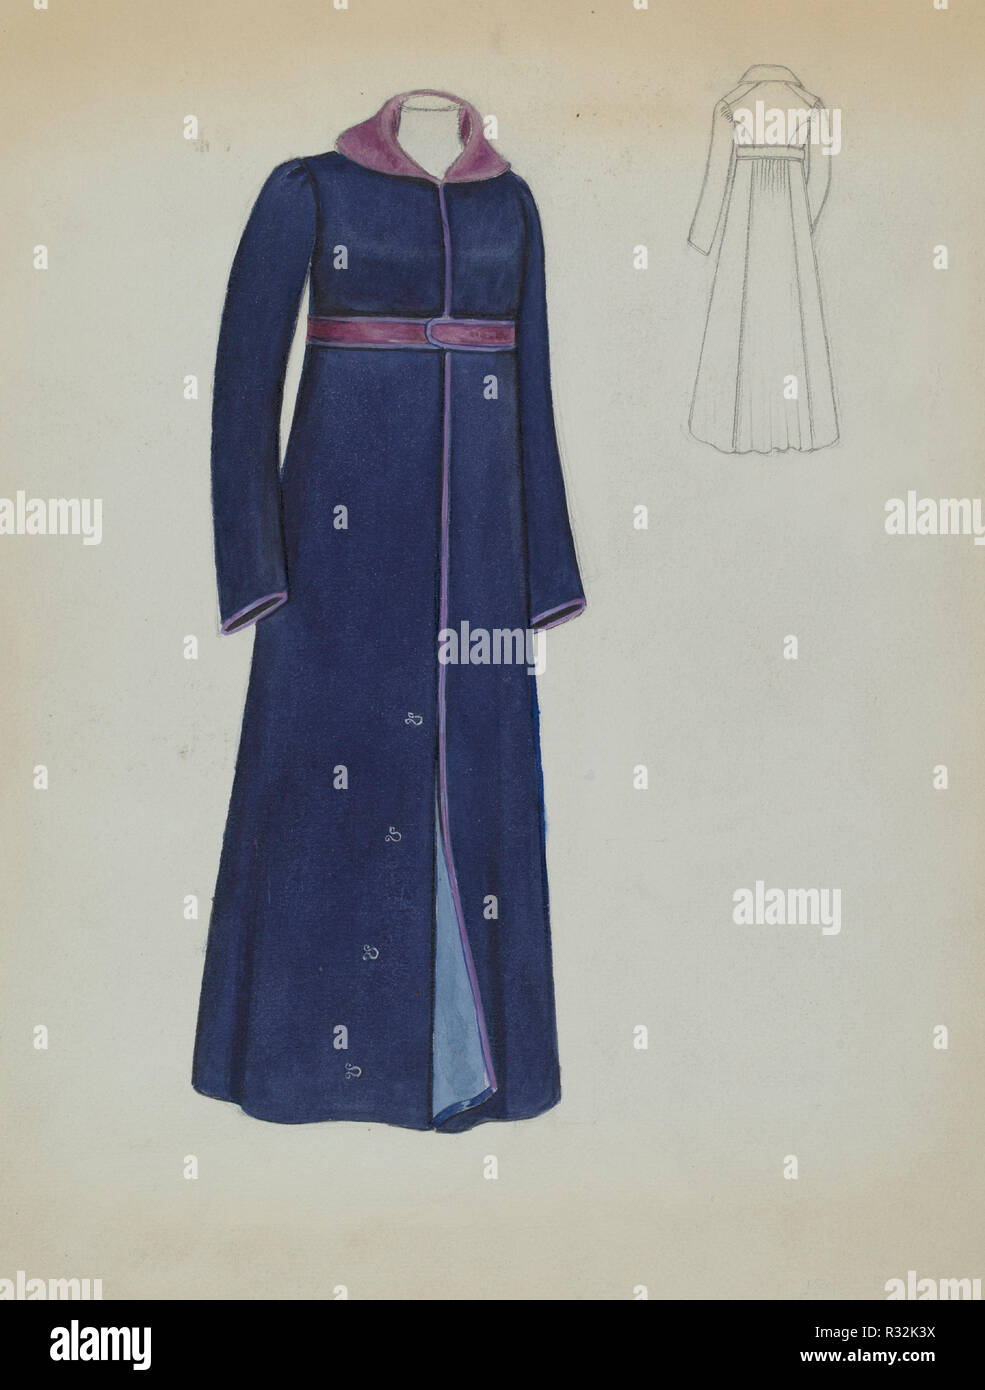 Coat. Dated: 1935/1942. Dimensions: overall: 30 x 22.9 cm (11 13/16 x 9 in.). Medium: watercolor and graphite on paper. Museum: National Gallery of Art, Washington DC. Author: Jessie M. Benge. Stock Photo